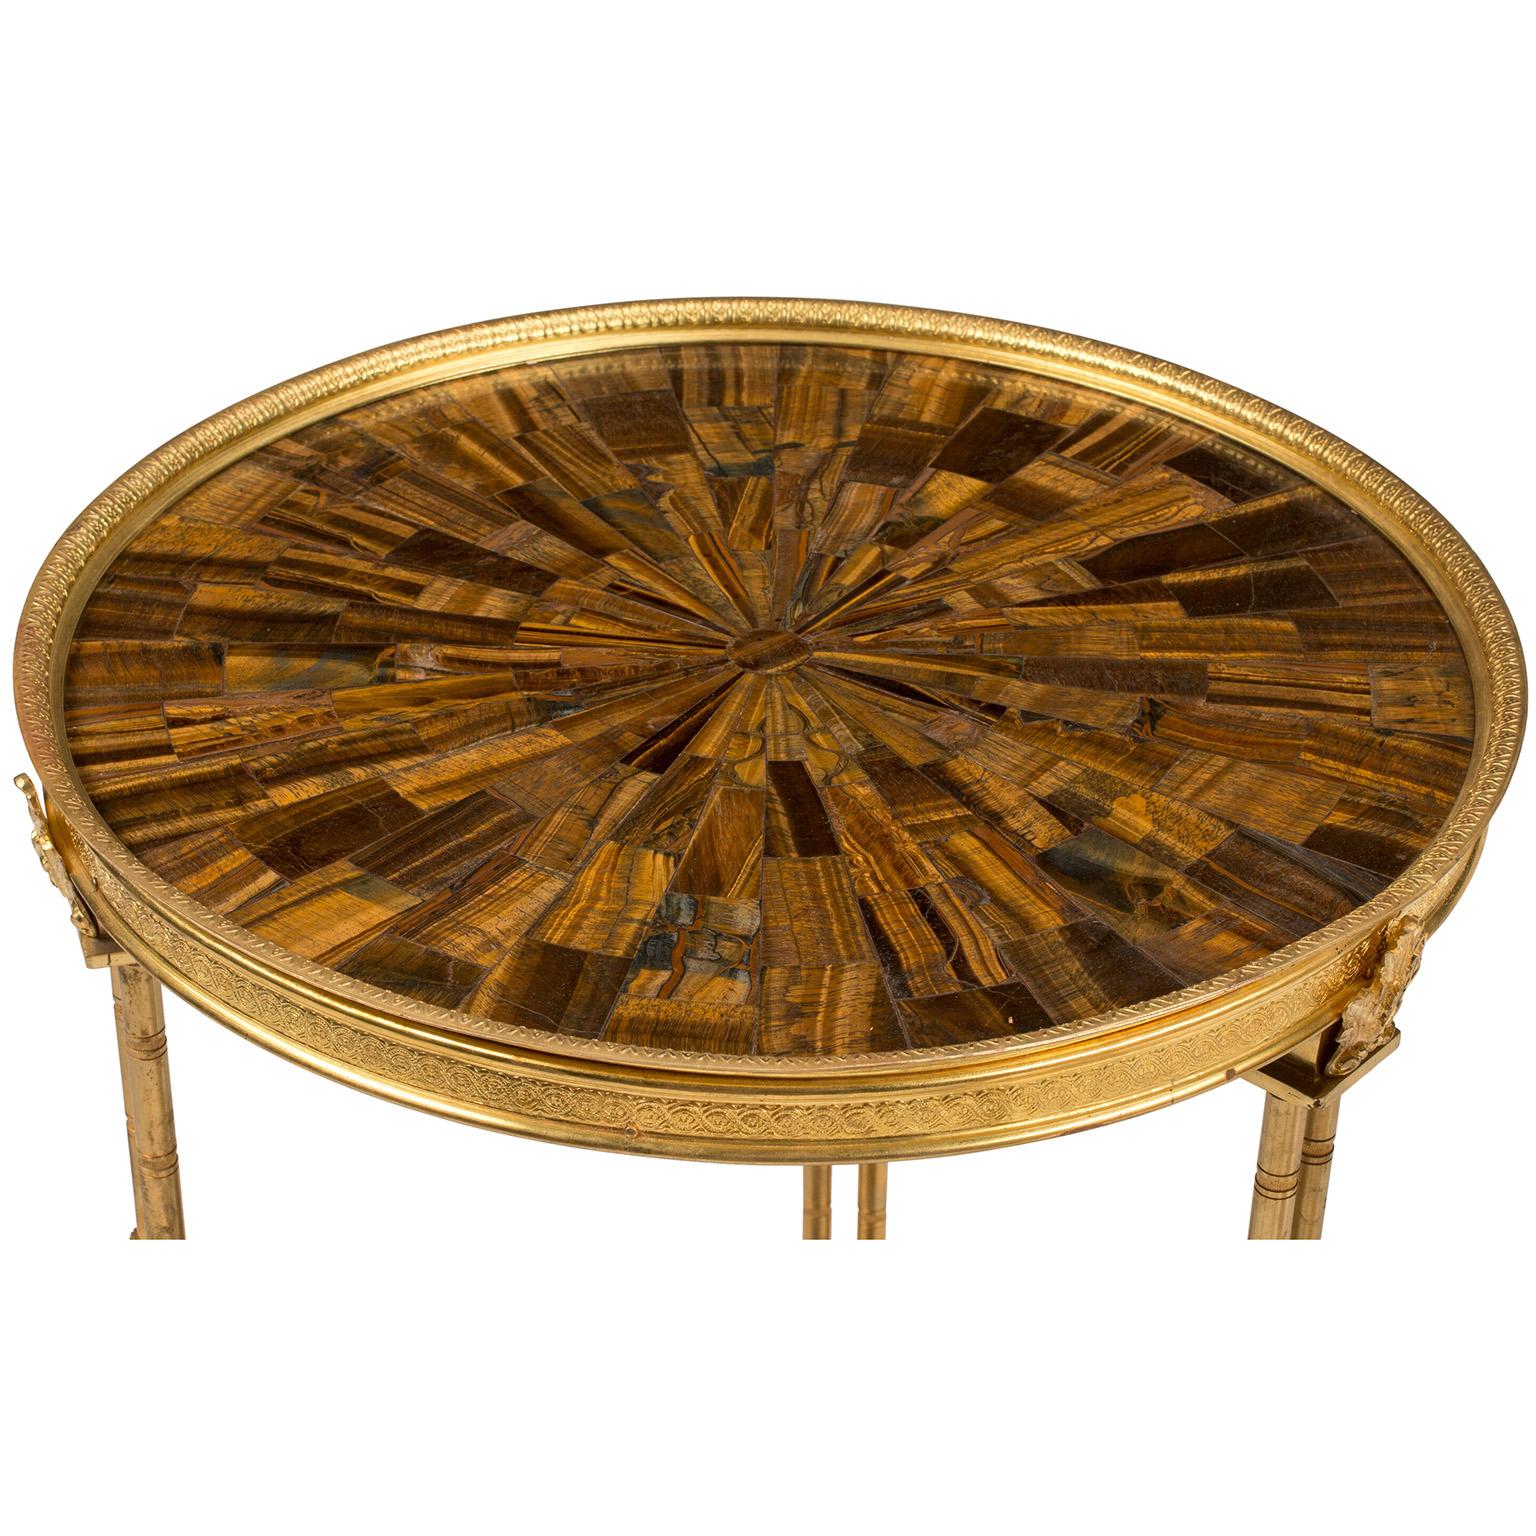 French Pair of Neoclassical-Style Gilt Bronze Round Side Tables with Tiger-Eye Tops